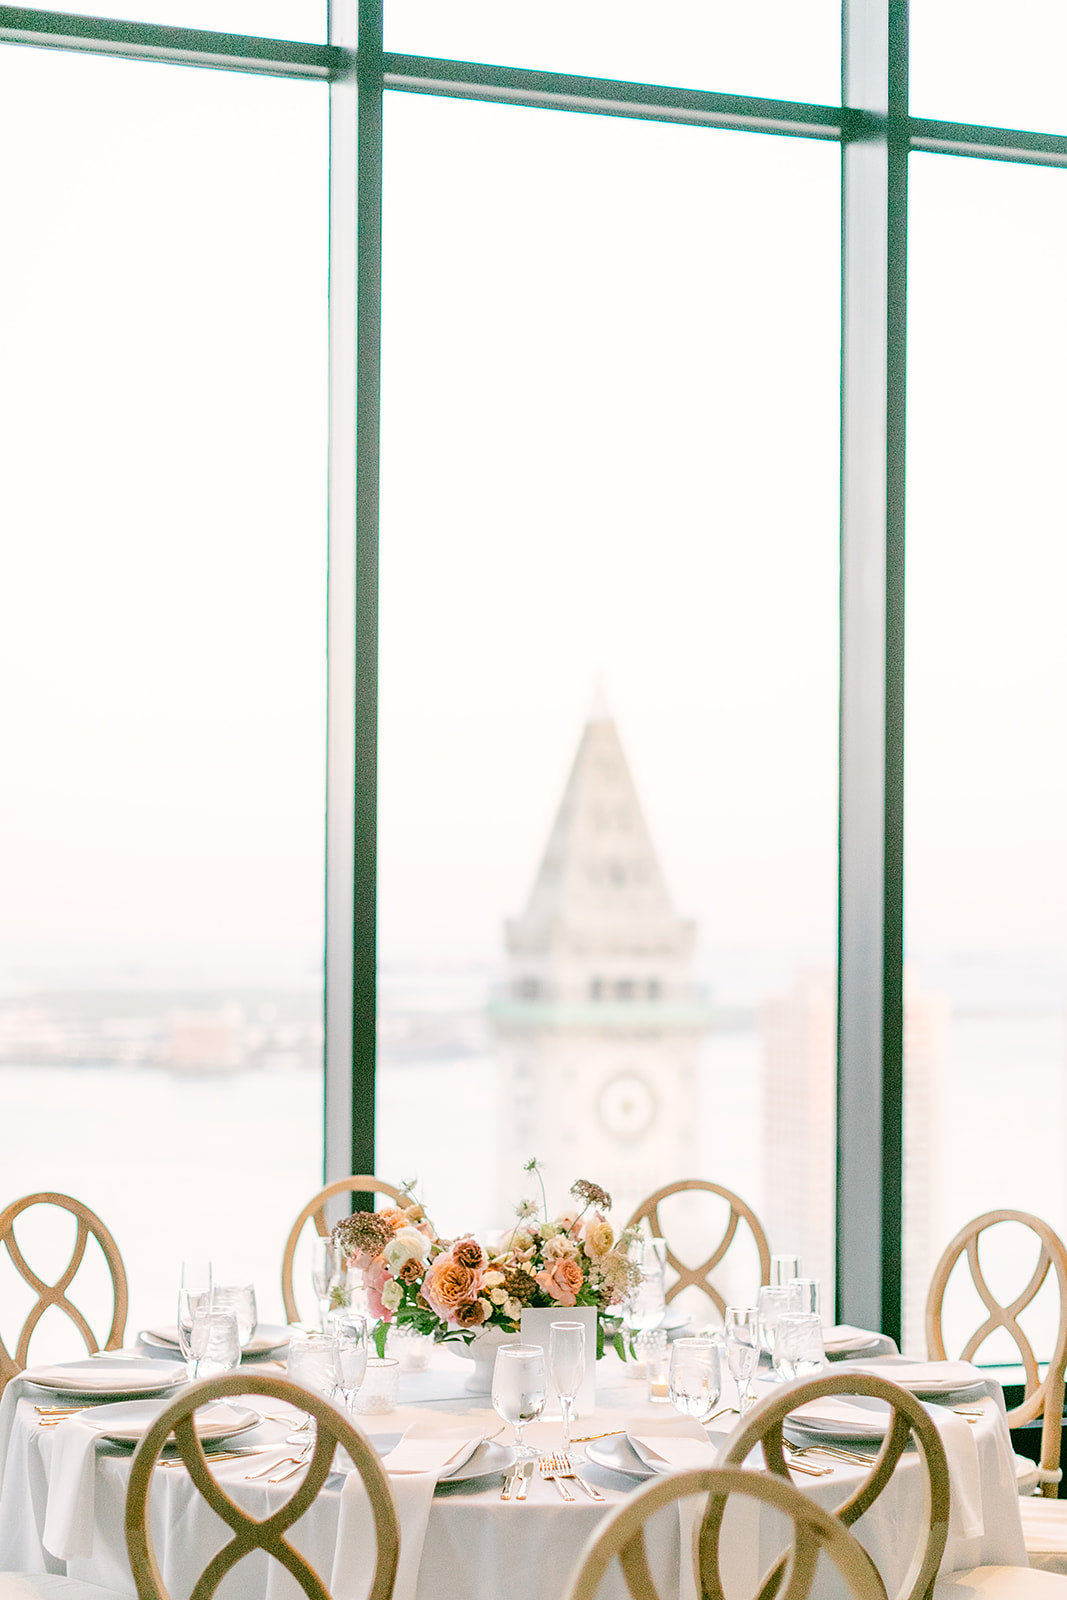 The Boston waterfront view from the State Room venue, Wedding reception with beautiful florals and tabletop set for the party.